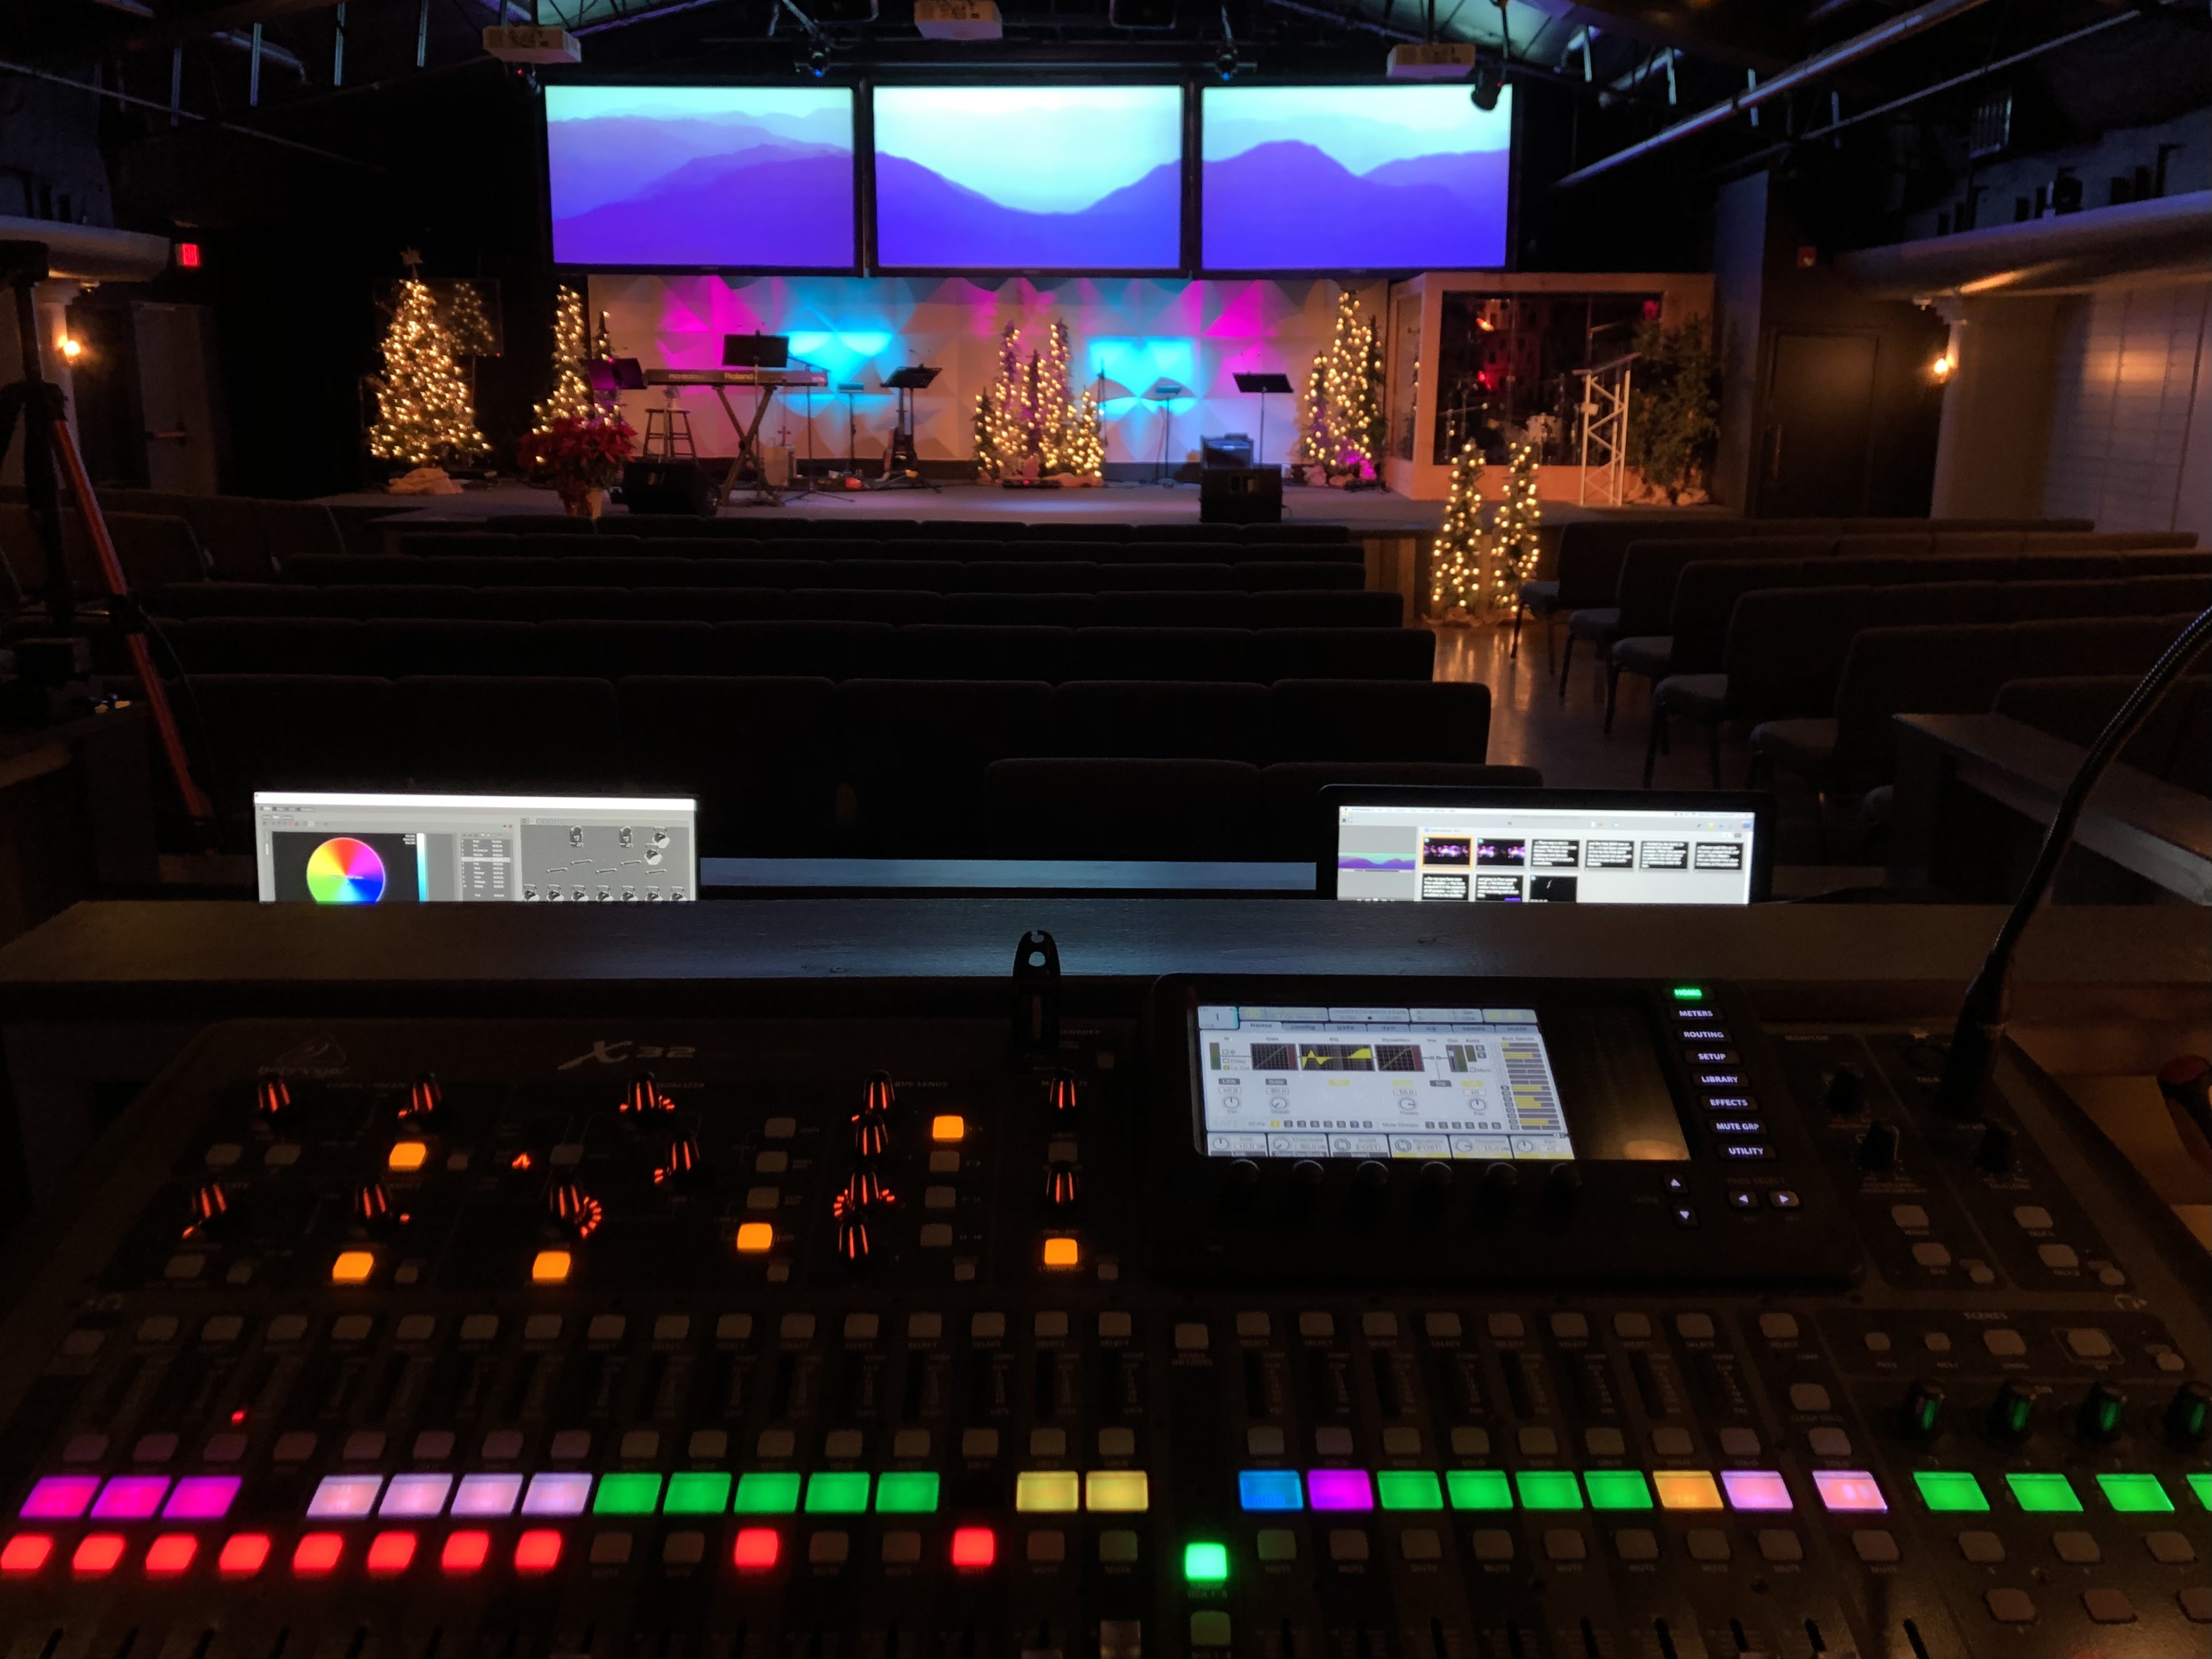 LifeQuest Church Finds “Perfect” Projector to Fit Its Needs With Maxell Pro AV